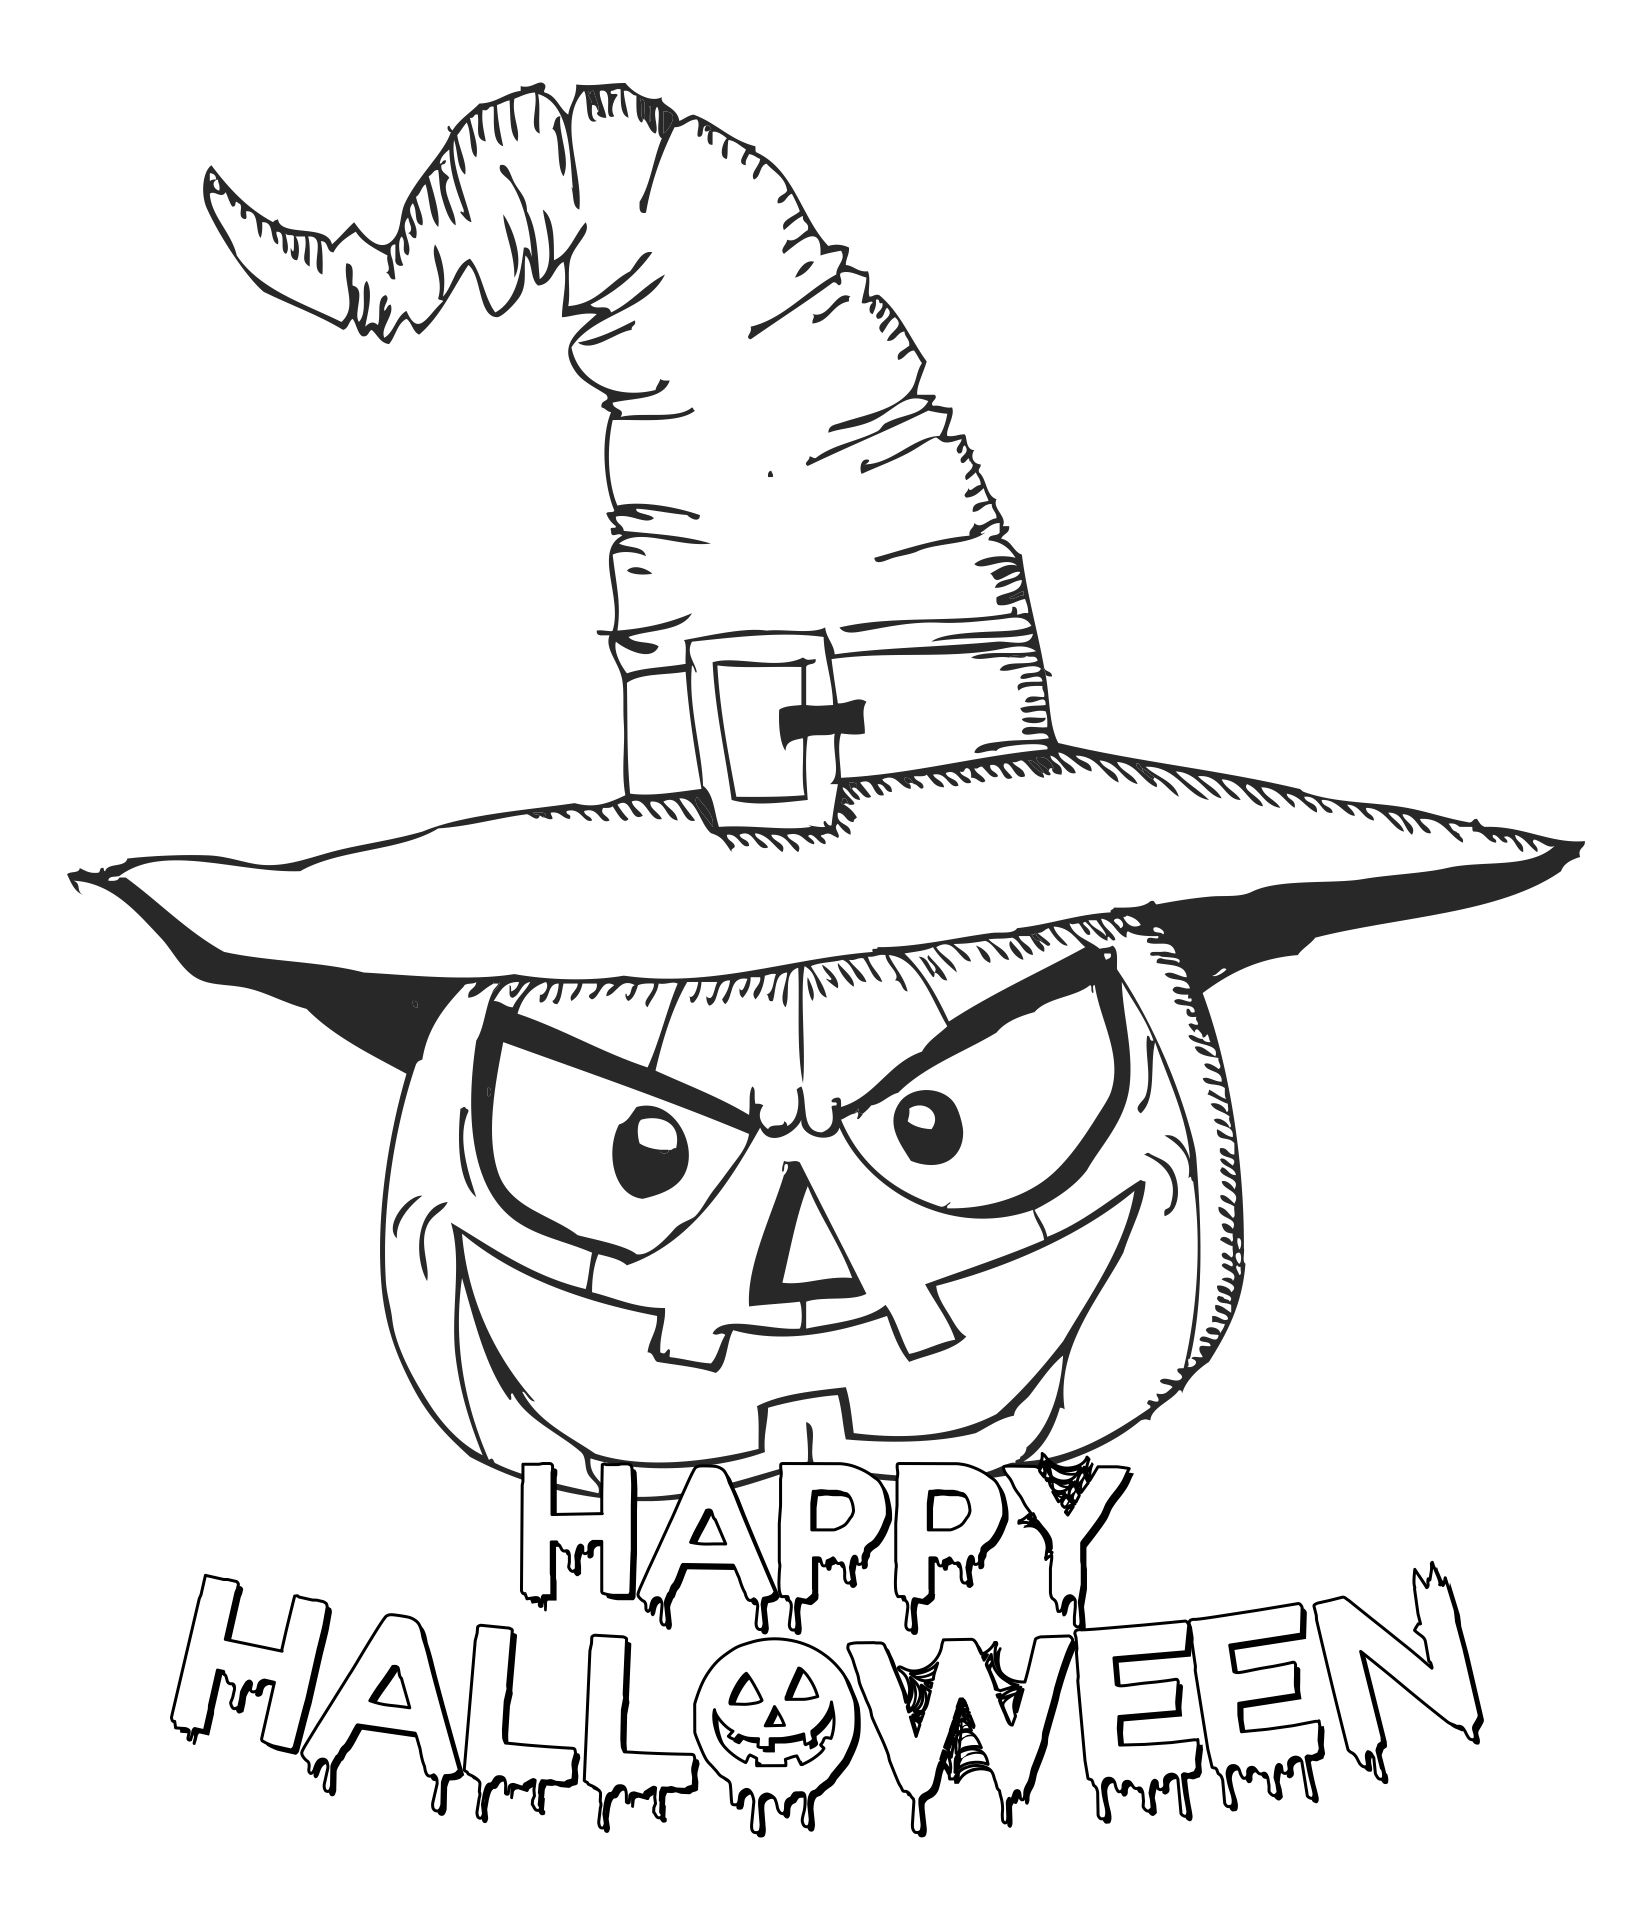 Halloween Coloring Pages For Adults 15 Free PDF Printables Printablee